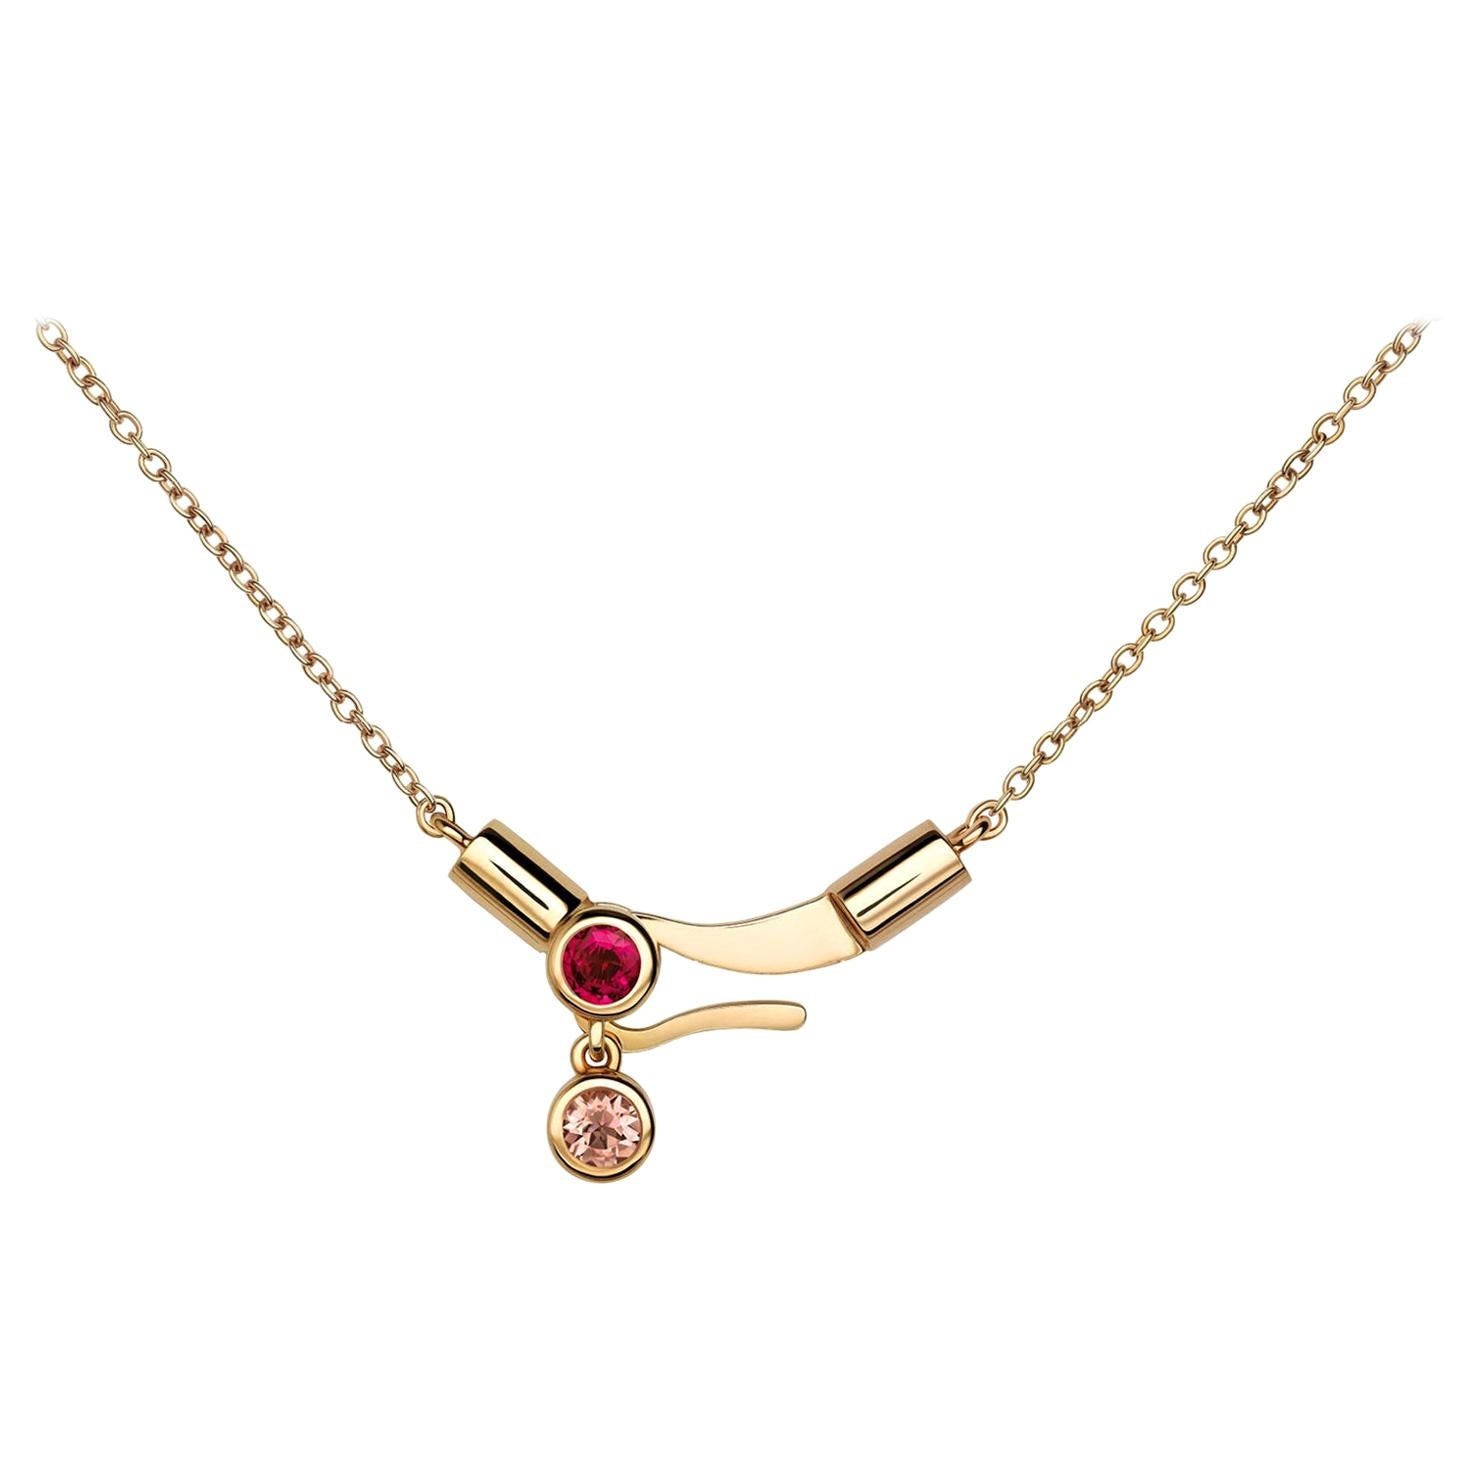 Nathalie Jean Contemporary Ruby Tourmaline Gold Pendant Drop Dangle Necklace For Sale